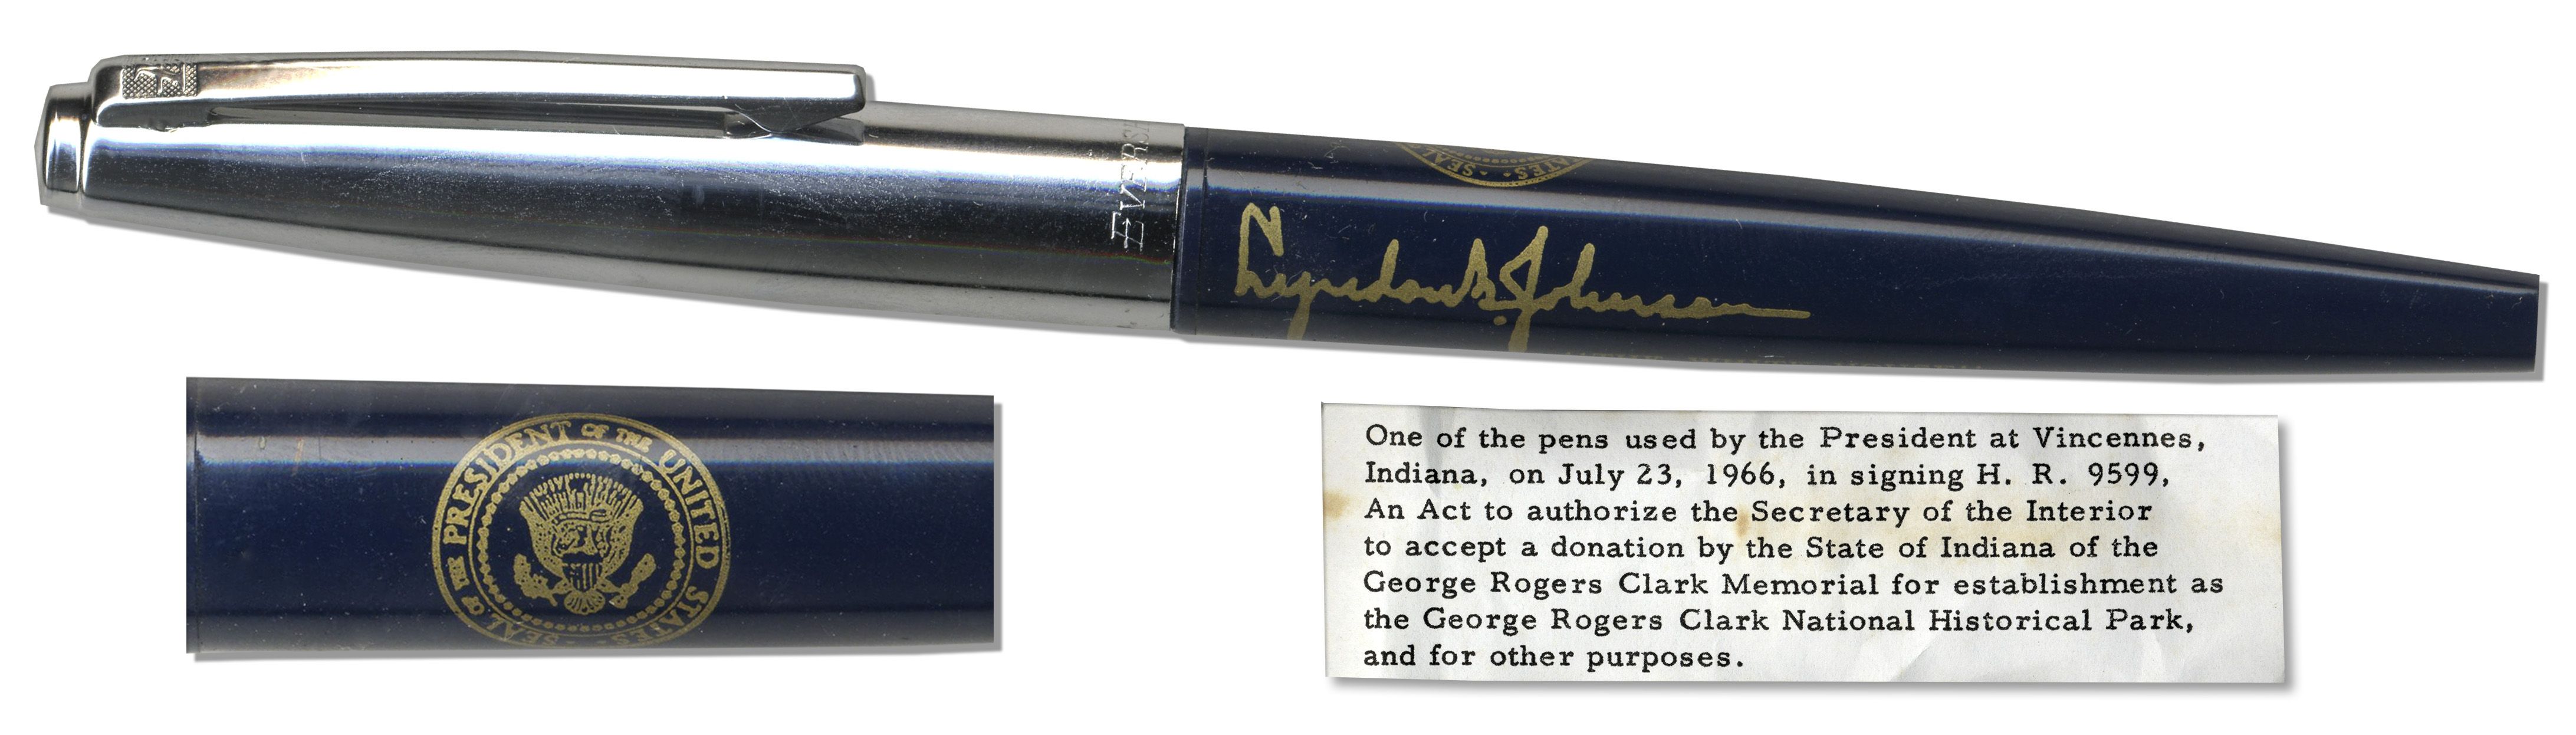 White House Pen Pen Used by President Lyndon B. Johnson to Sign Bill H.R. 9599 Into Law Establishing the George Rogers Clark National Park -- Includes Two Ink Refills and Two New Tips